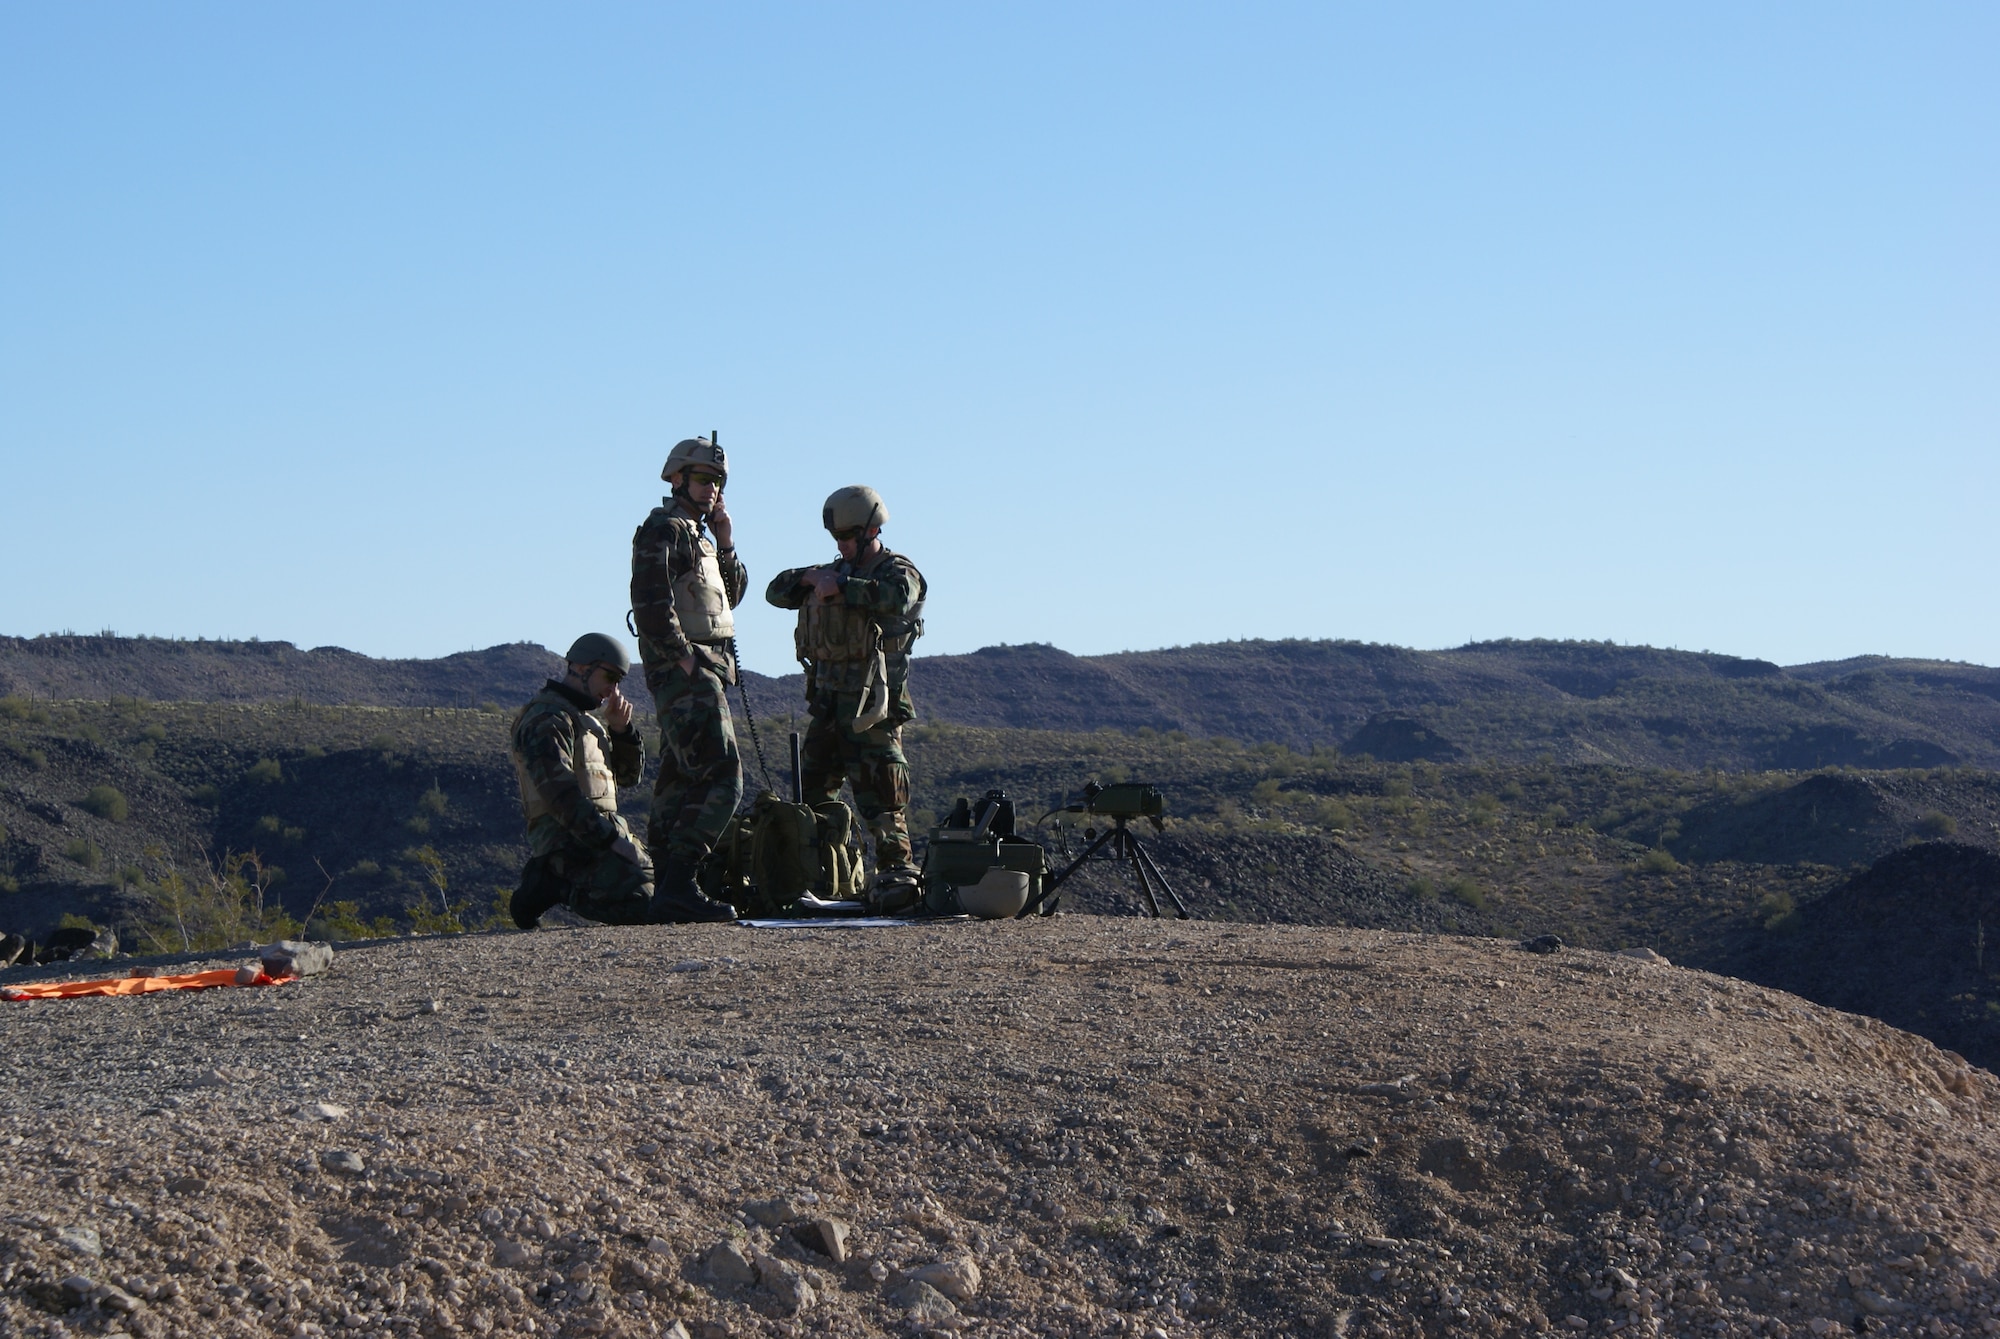 TACP Exercise: TACP members conducting pre-mission equipment checks for an exercise involving A-10 and F-16 fighter aircraft. The unit frequently conducts exercises both for deployment preparation and to maintain proficiency.   